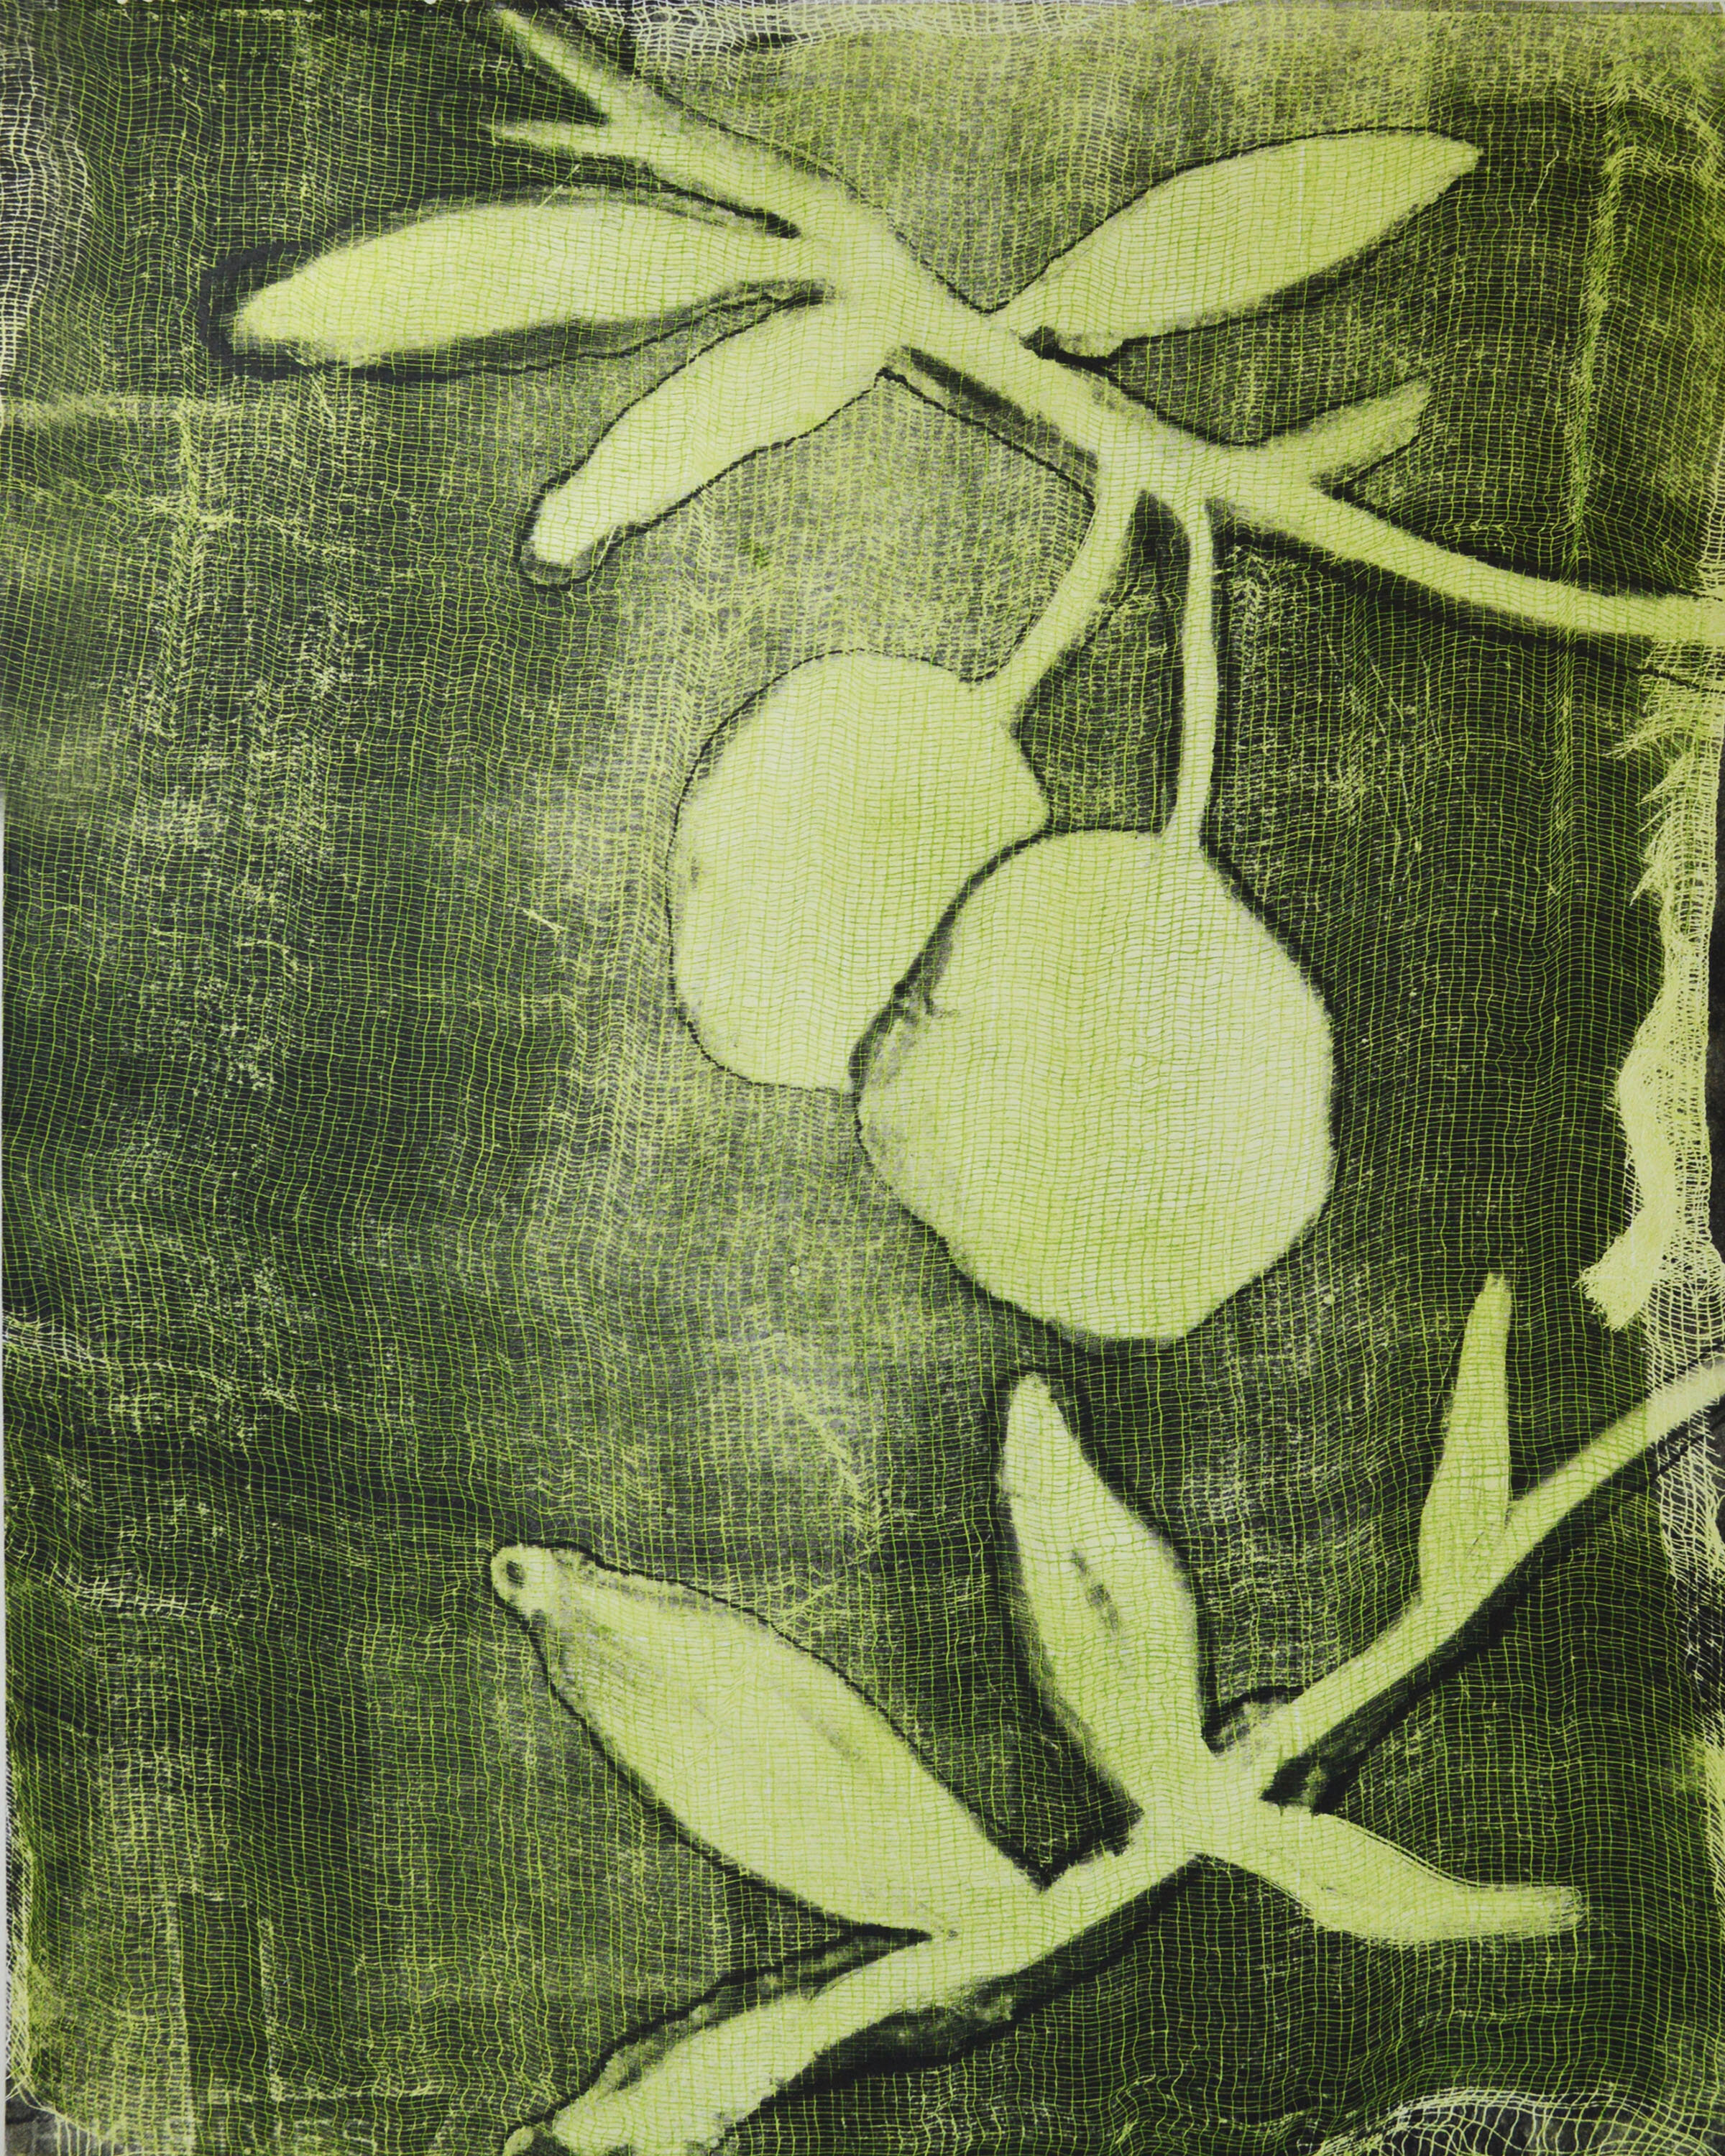   Ackee (In Green),  monotype on paper, 16” x 20”, 2020 